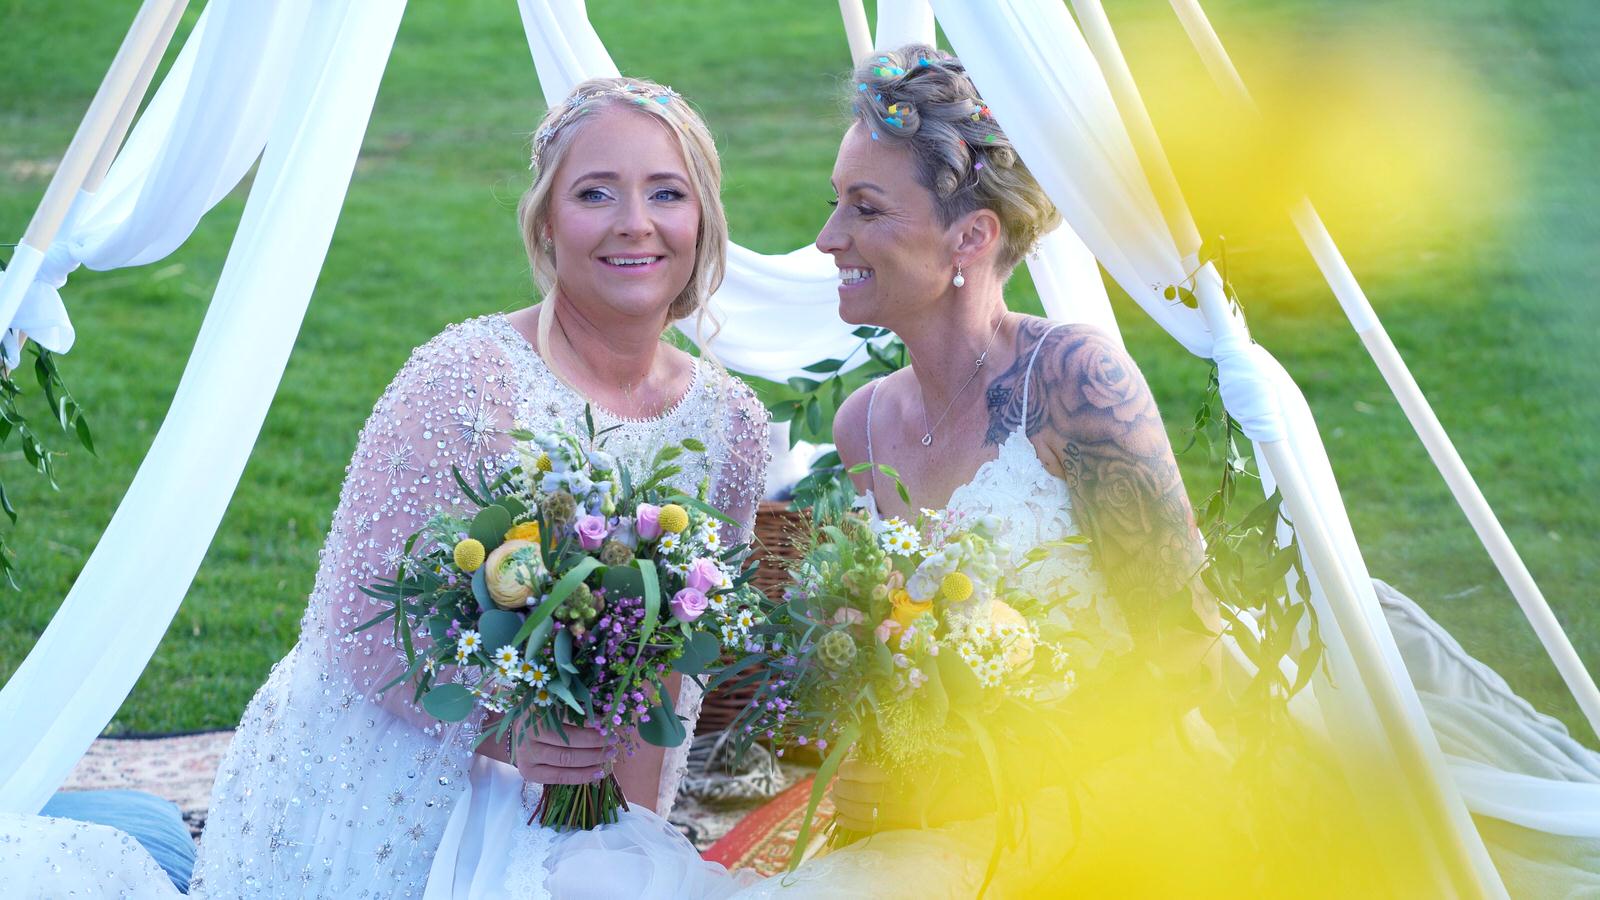 bride looks lovingly at her new wife